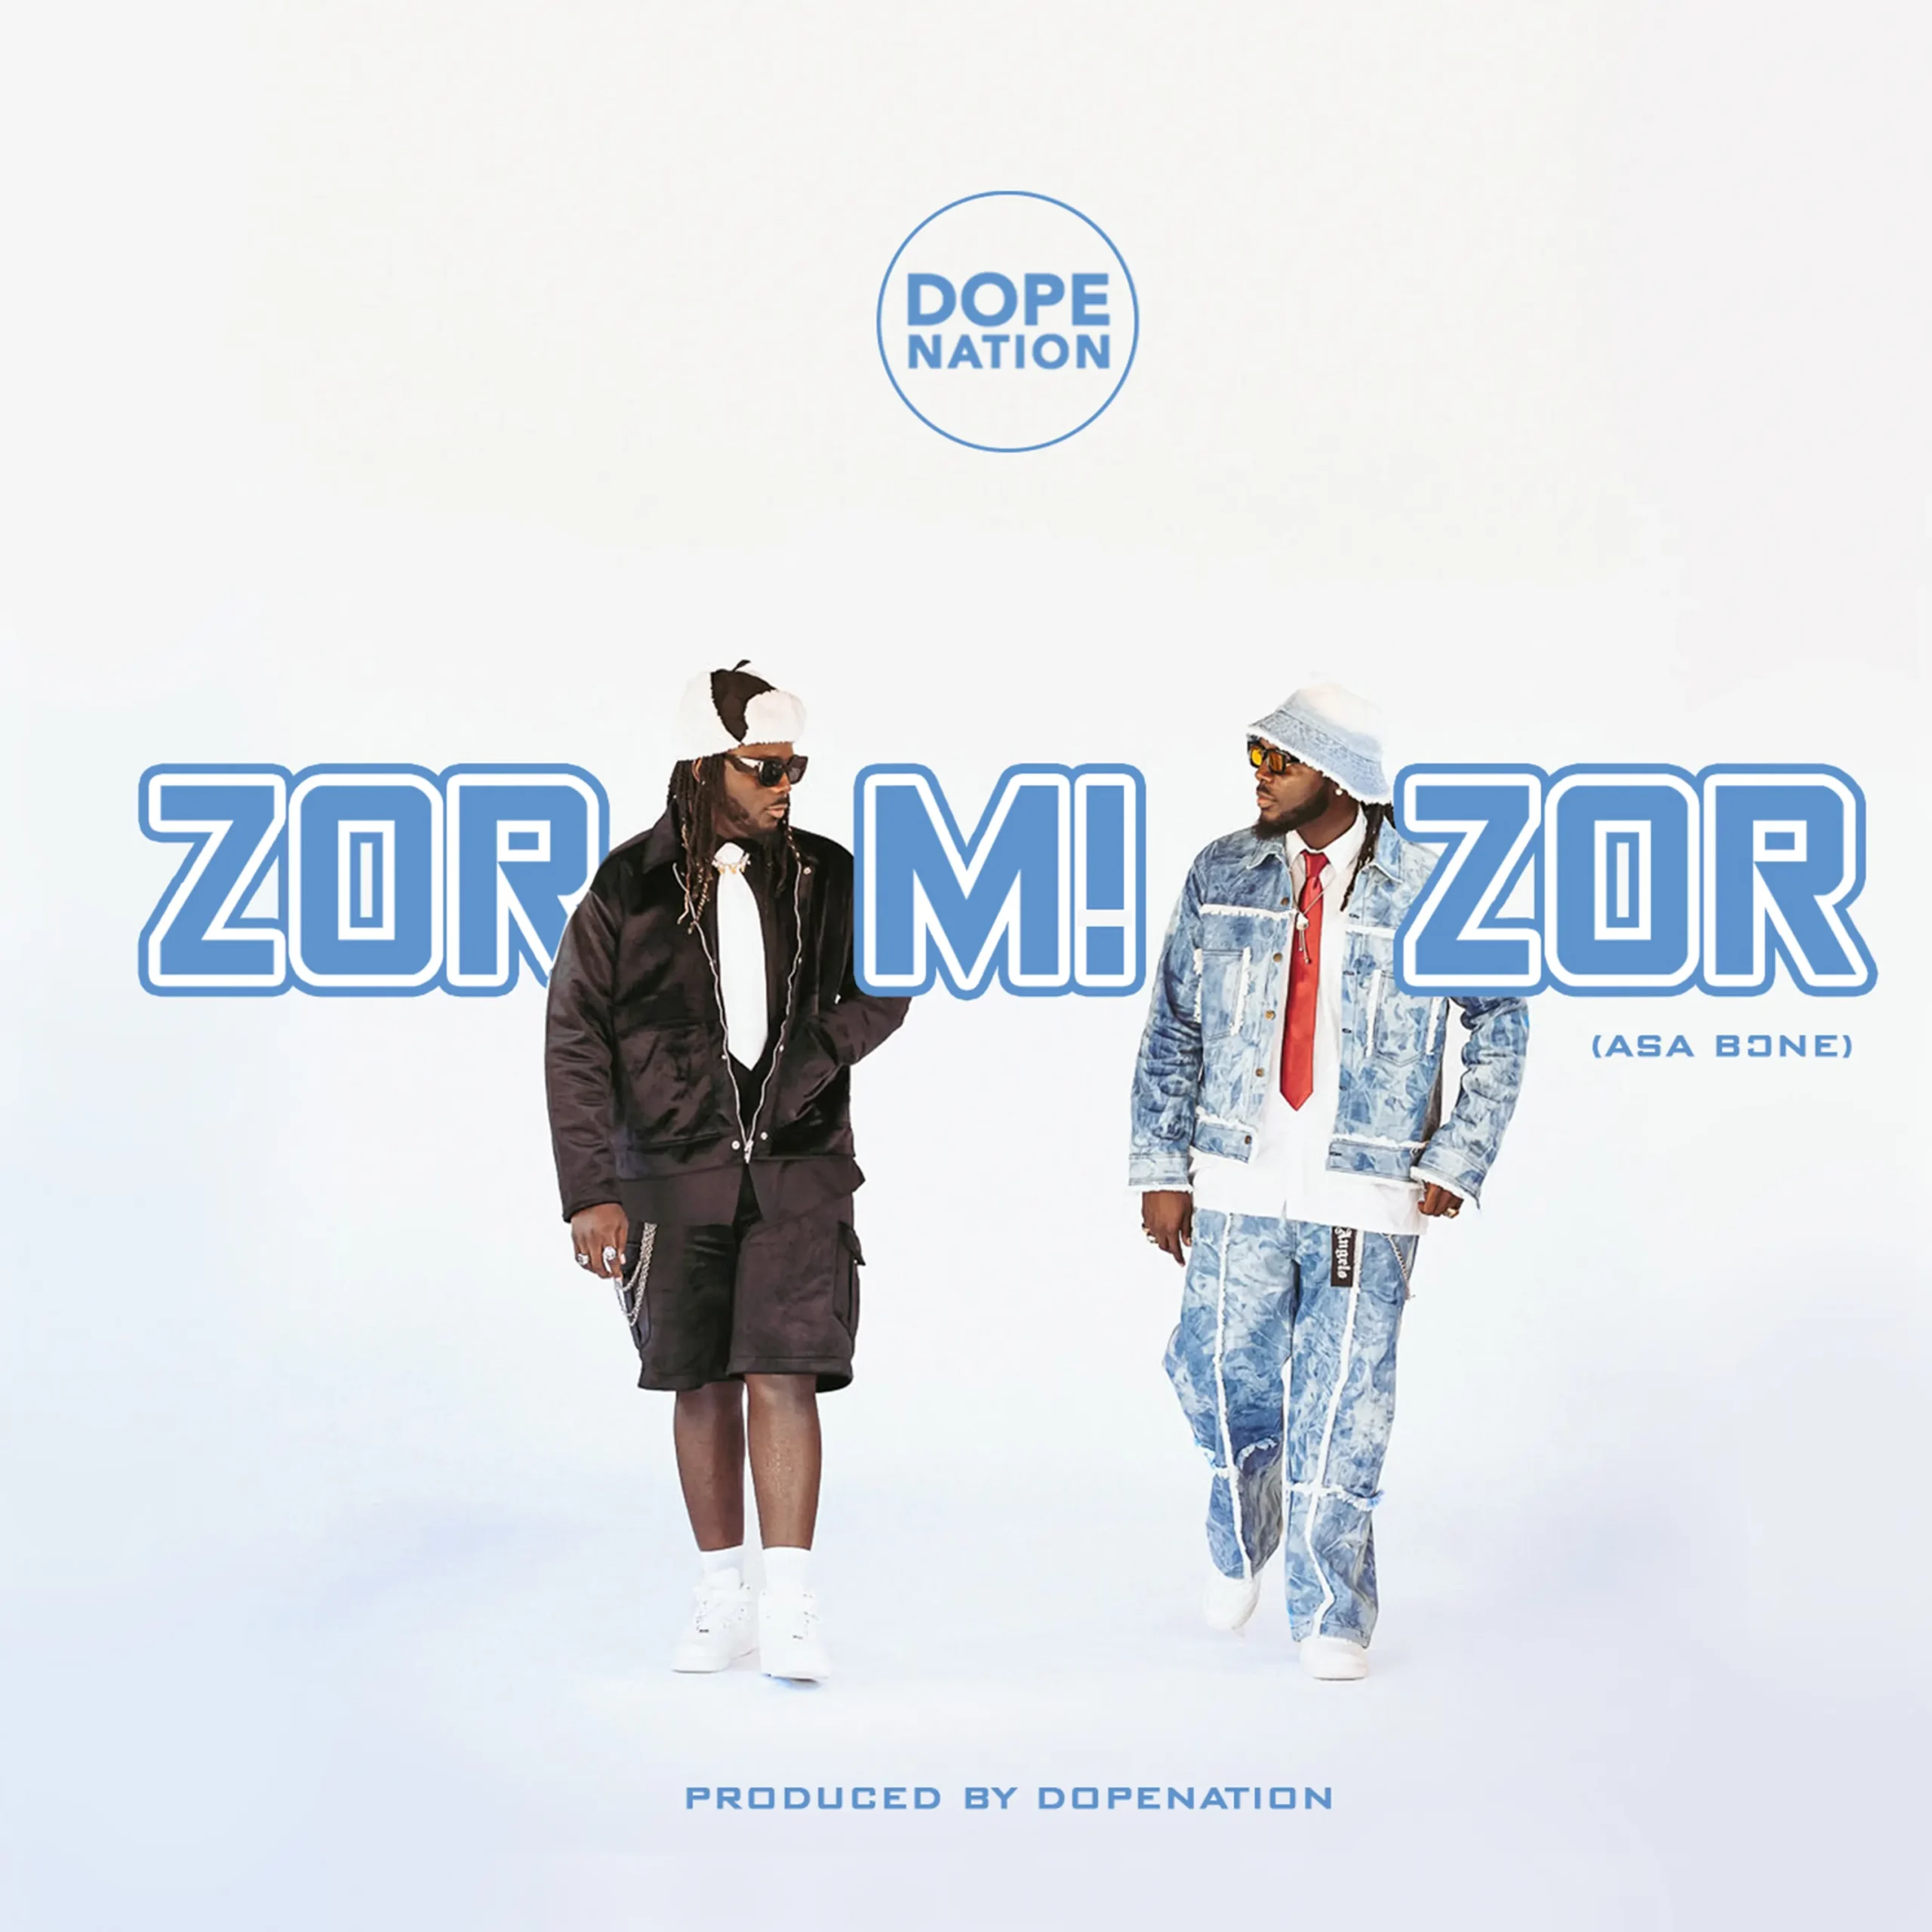 Two individuals in fashionable clothing stand against a white background with the text "ZOR MI ZOR" and "DopeNation - ZormiZor (AsaBone)" displayed above them.